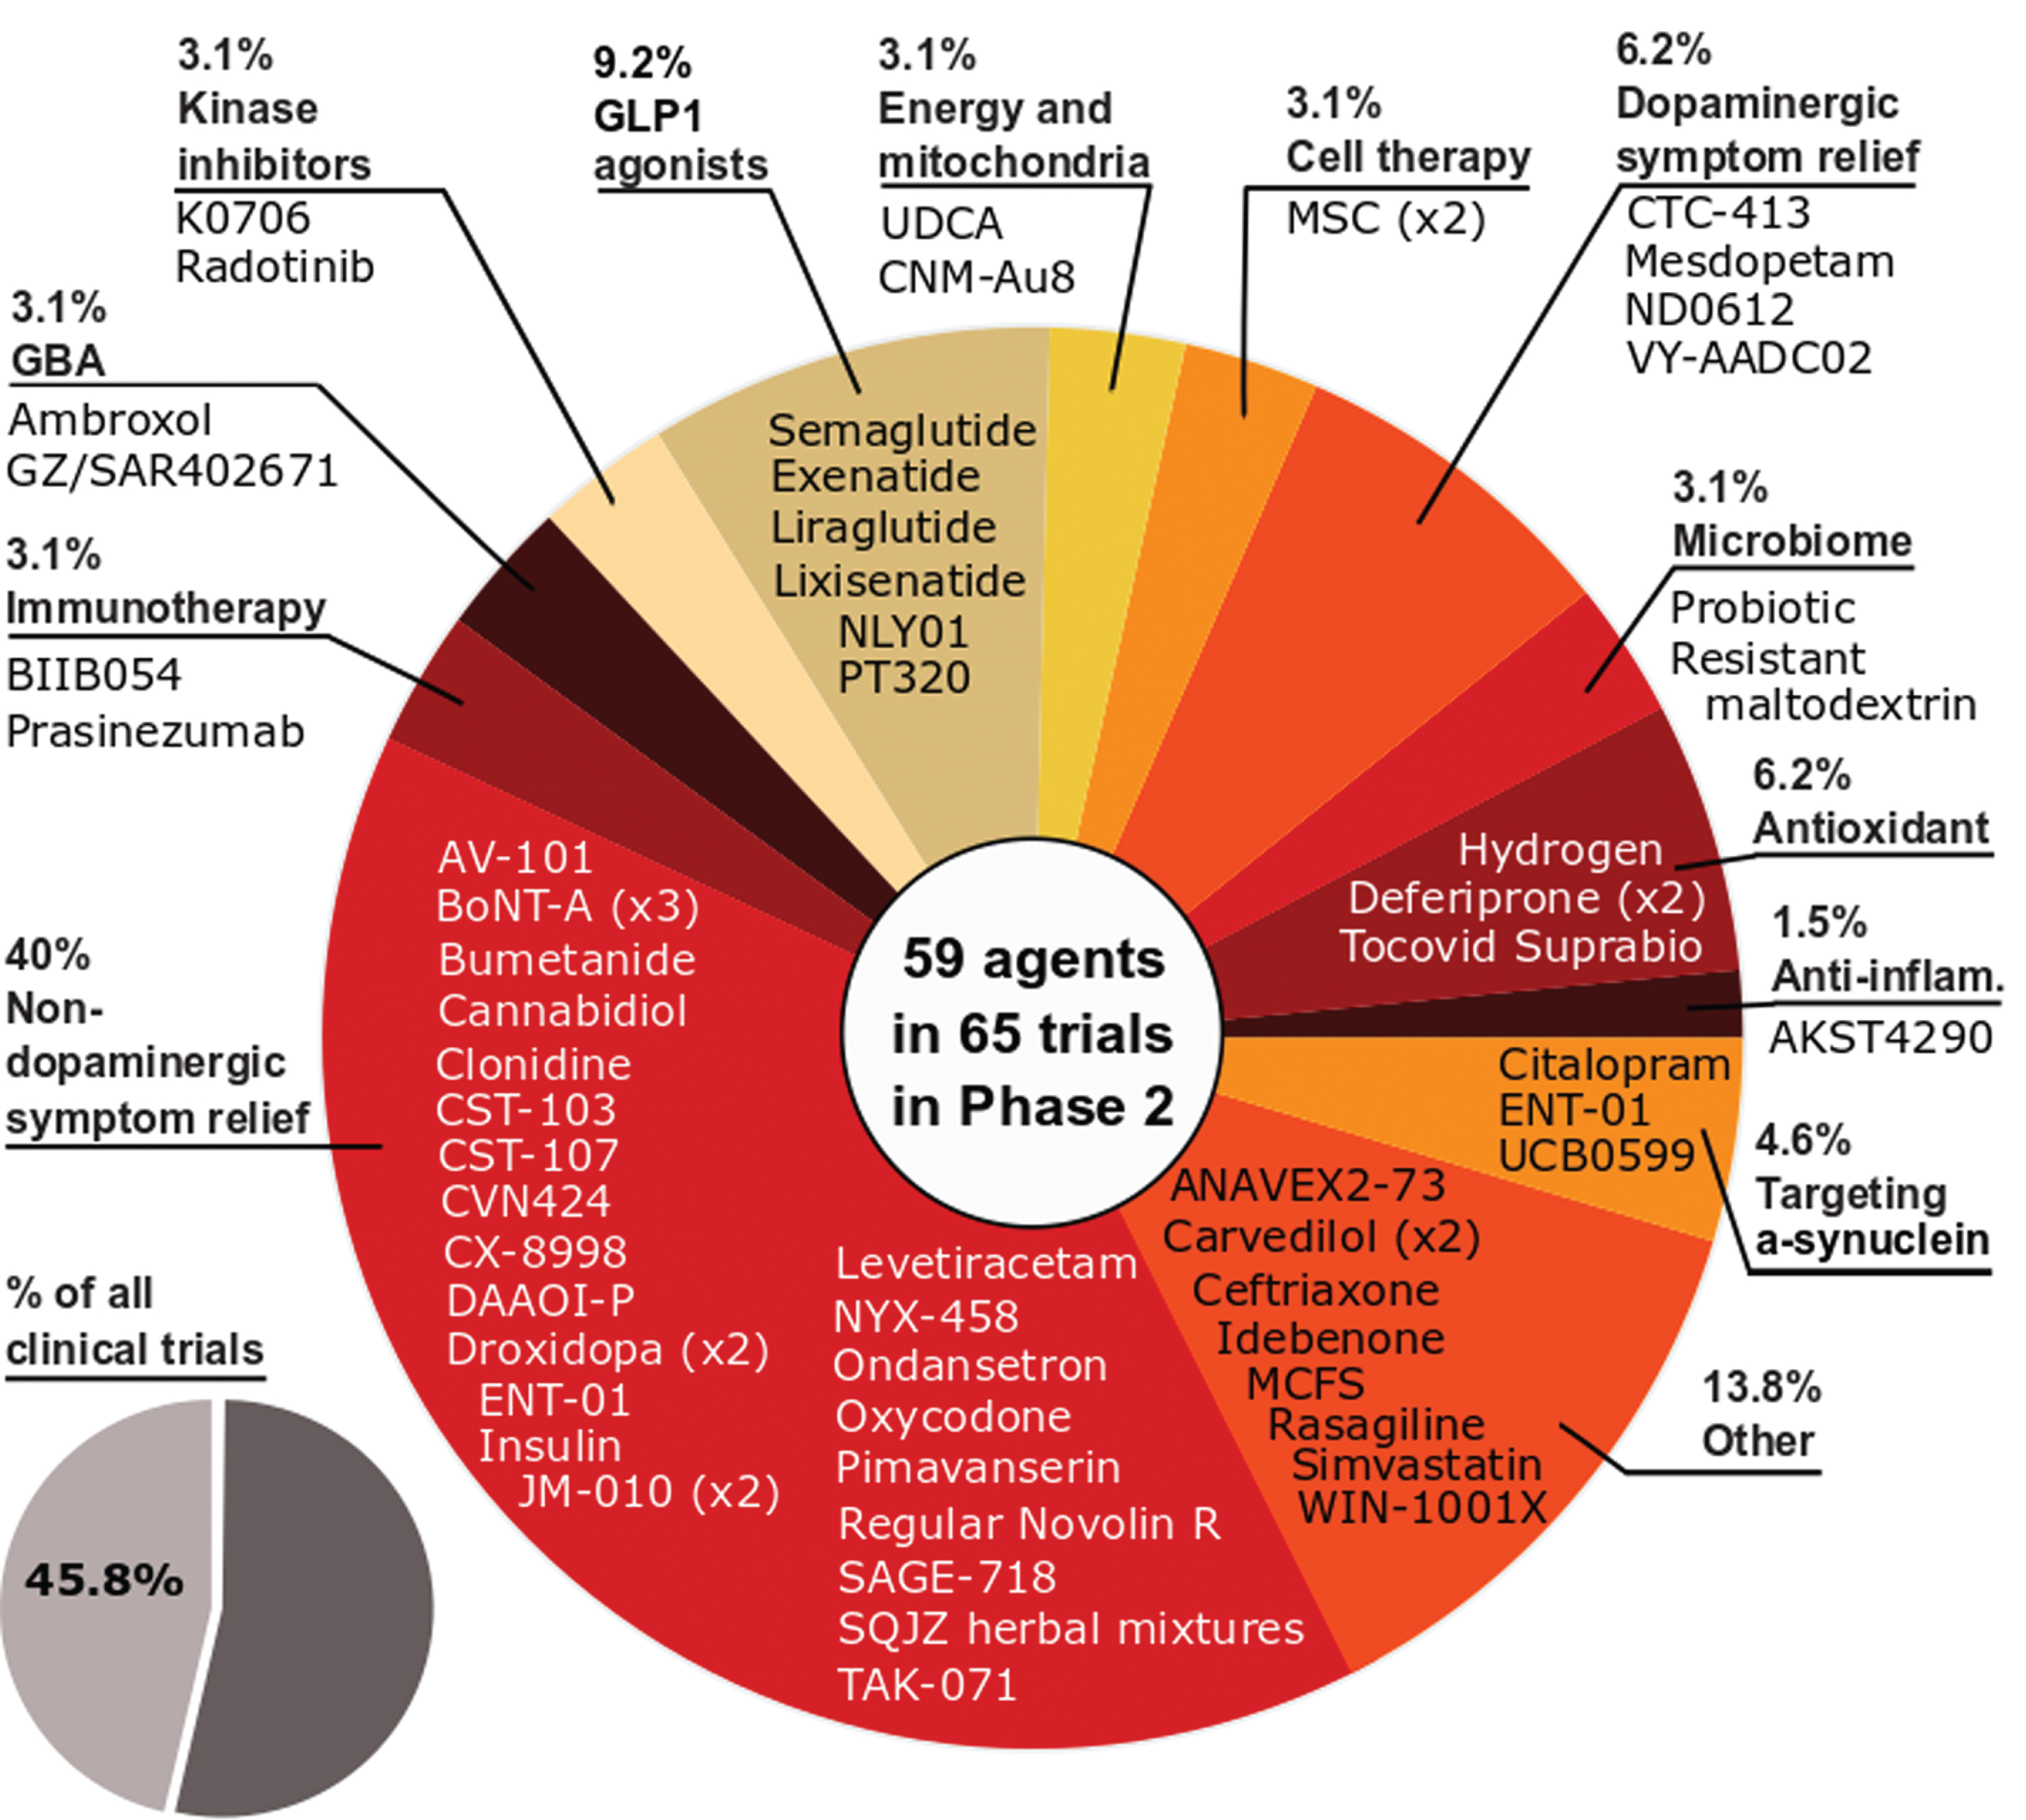 A schematic of the agents in active phase 2 trials for PD, registered on clinicaltrials.gov as of February 18th 2021.